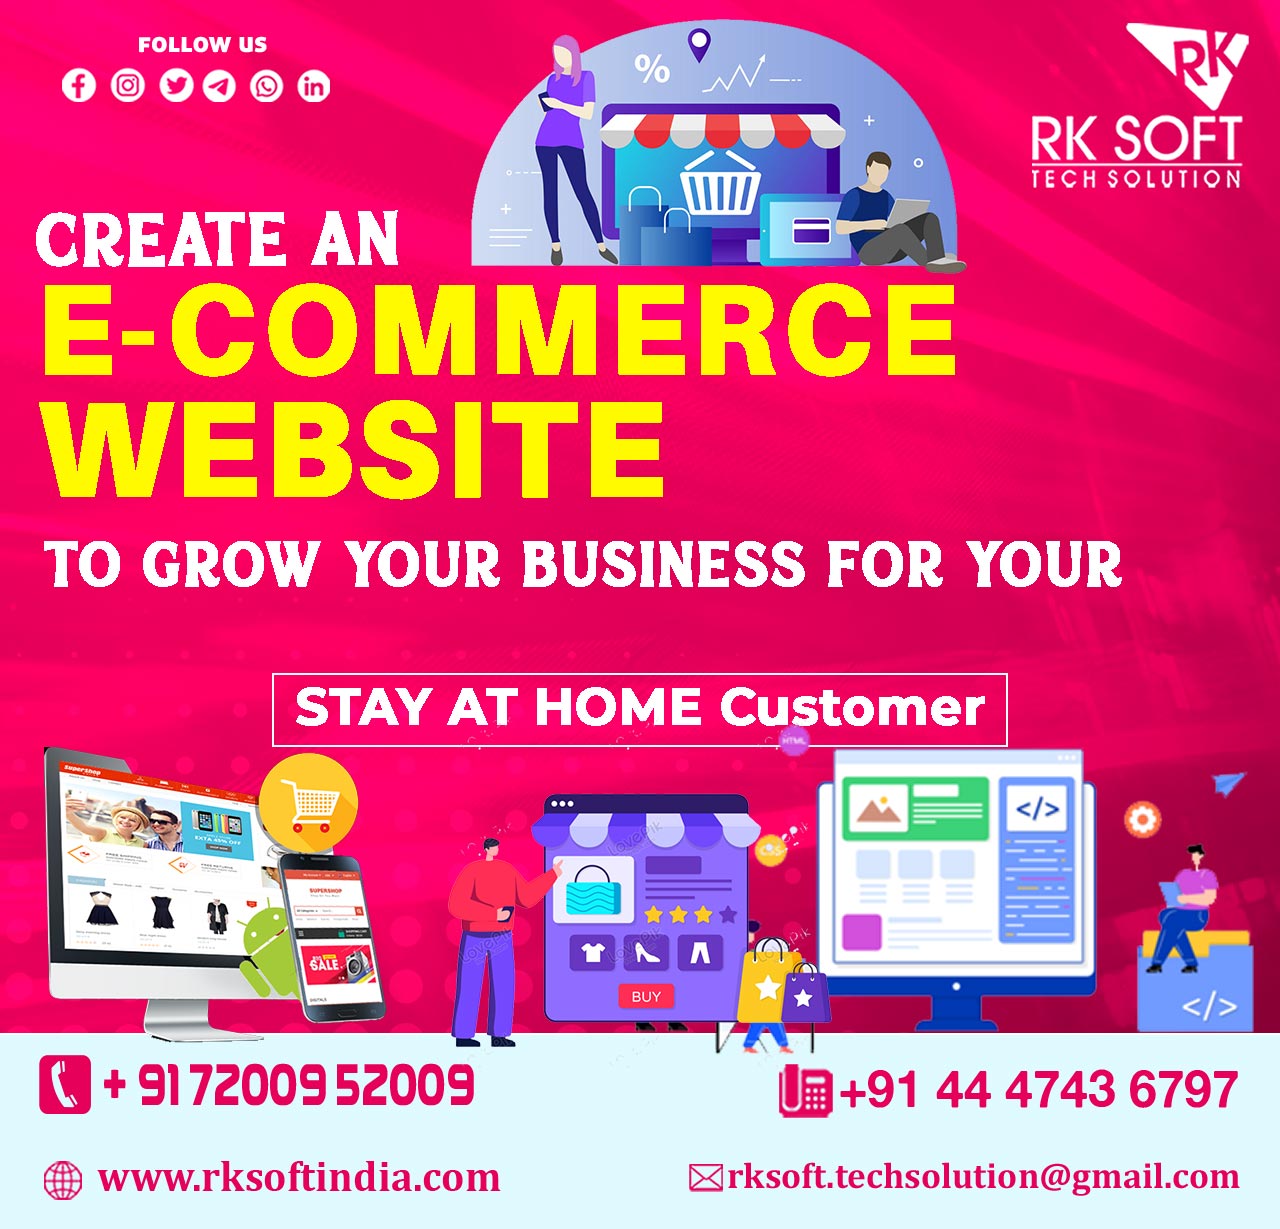 Award Winning Website Developers and Web Developers India RK Soft Chennai TamilnaduServicesAdvertising - DesignAll Indiaother